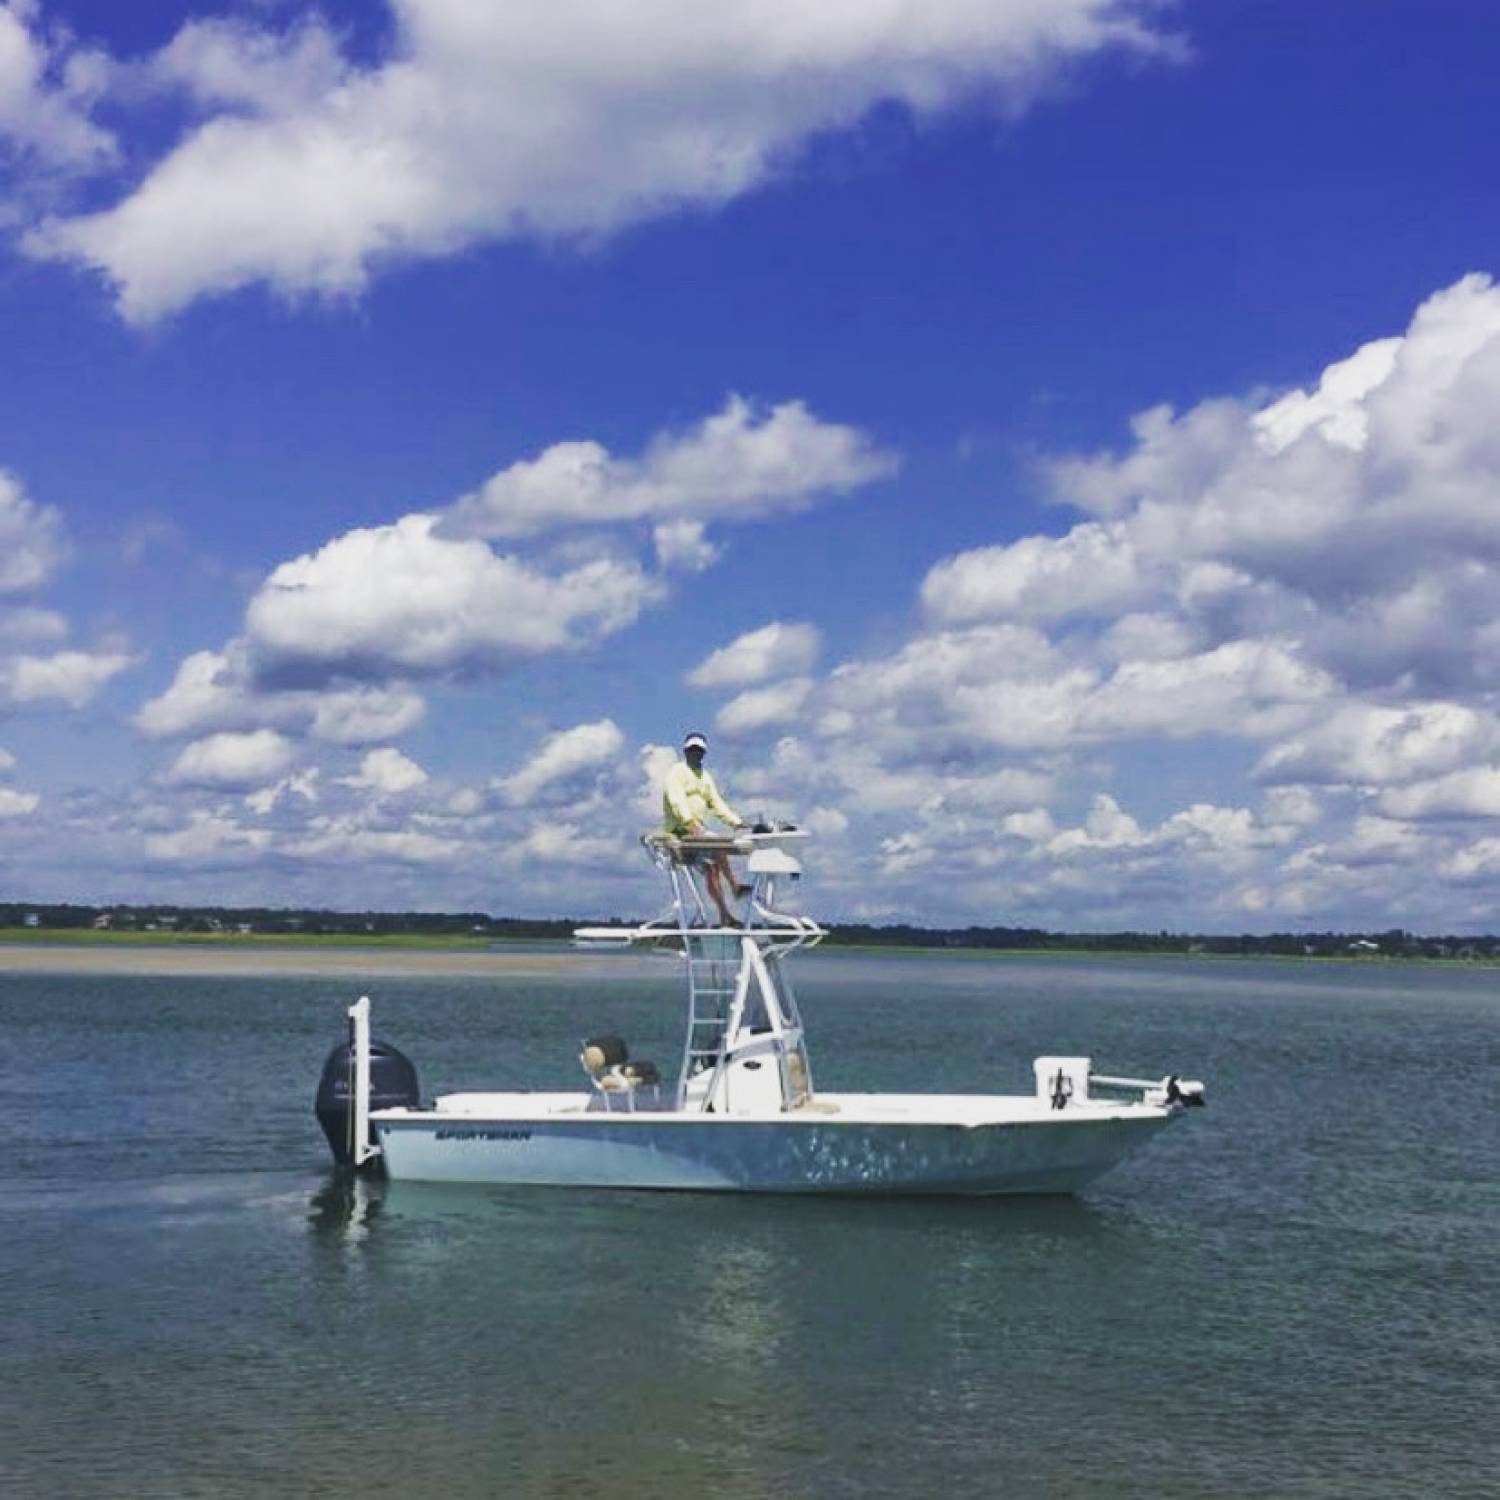 Title: Chewy the Forever Fisherman - On board their Sportsman Open 282 Center Console - Location: Lea Island ICW, Hampstead, NC. Participating in the Photo Contest #SportsmanApril